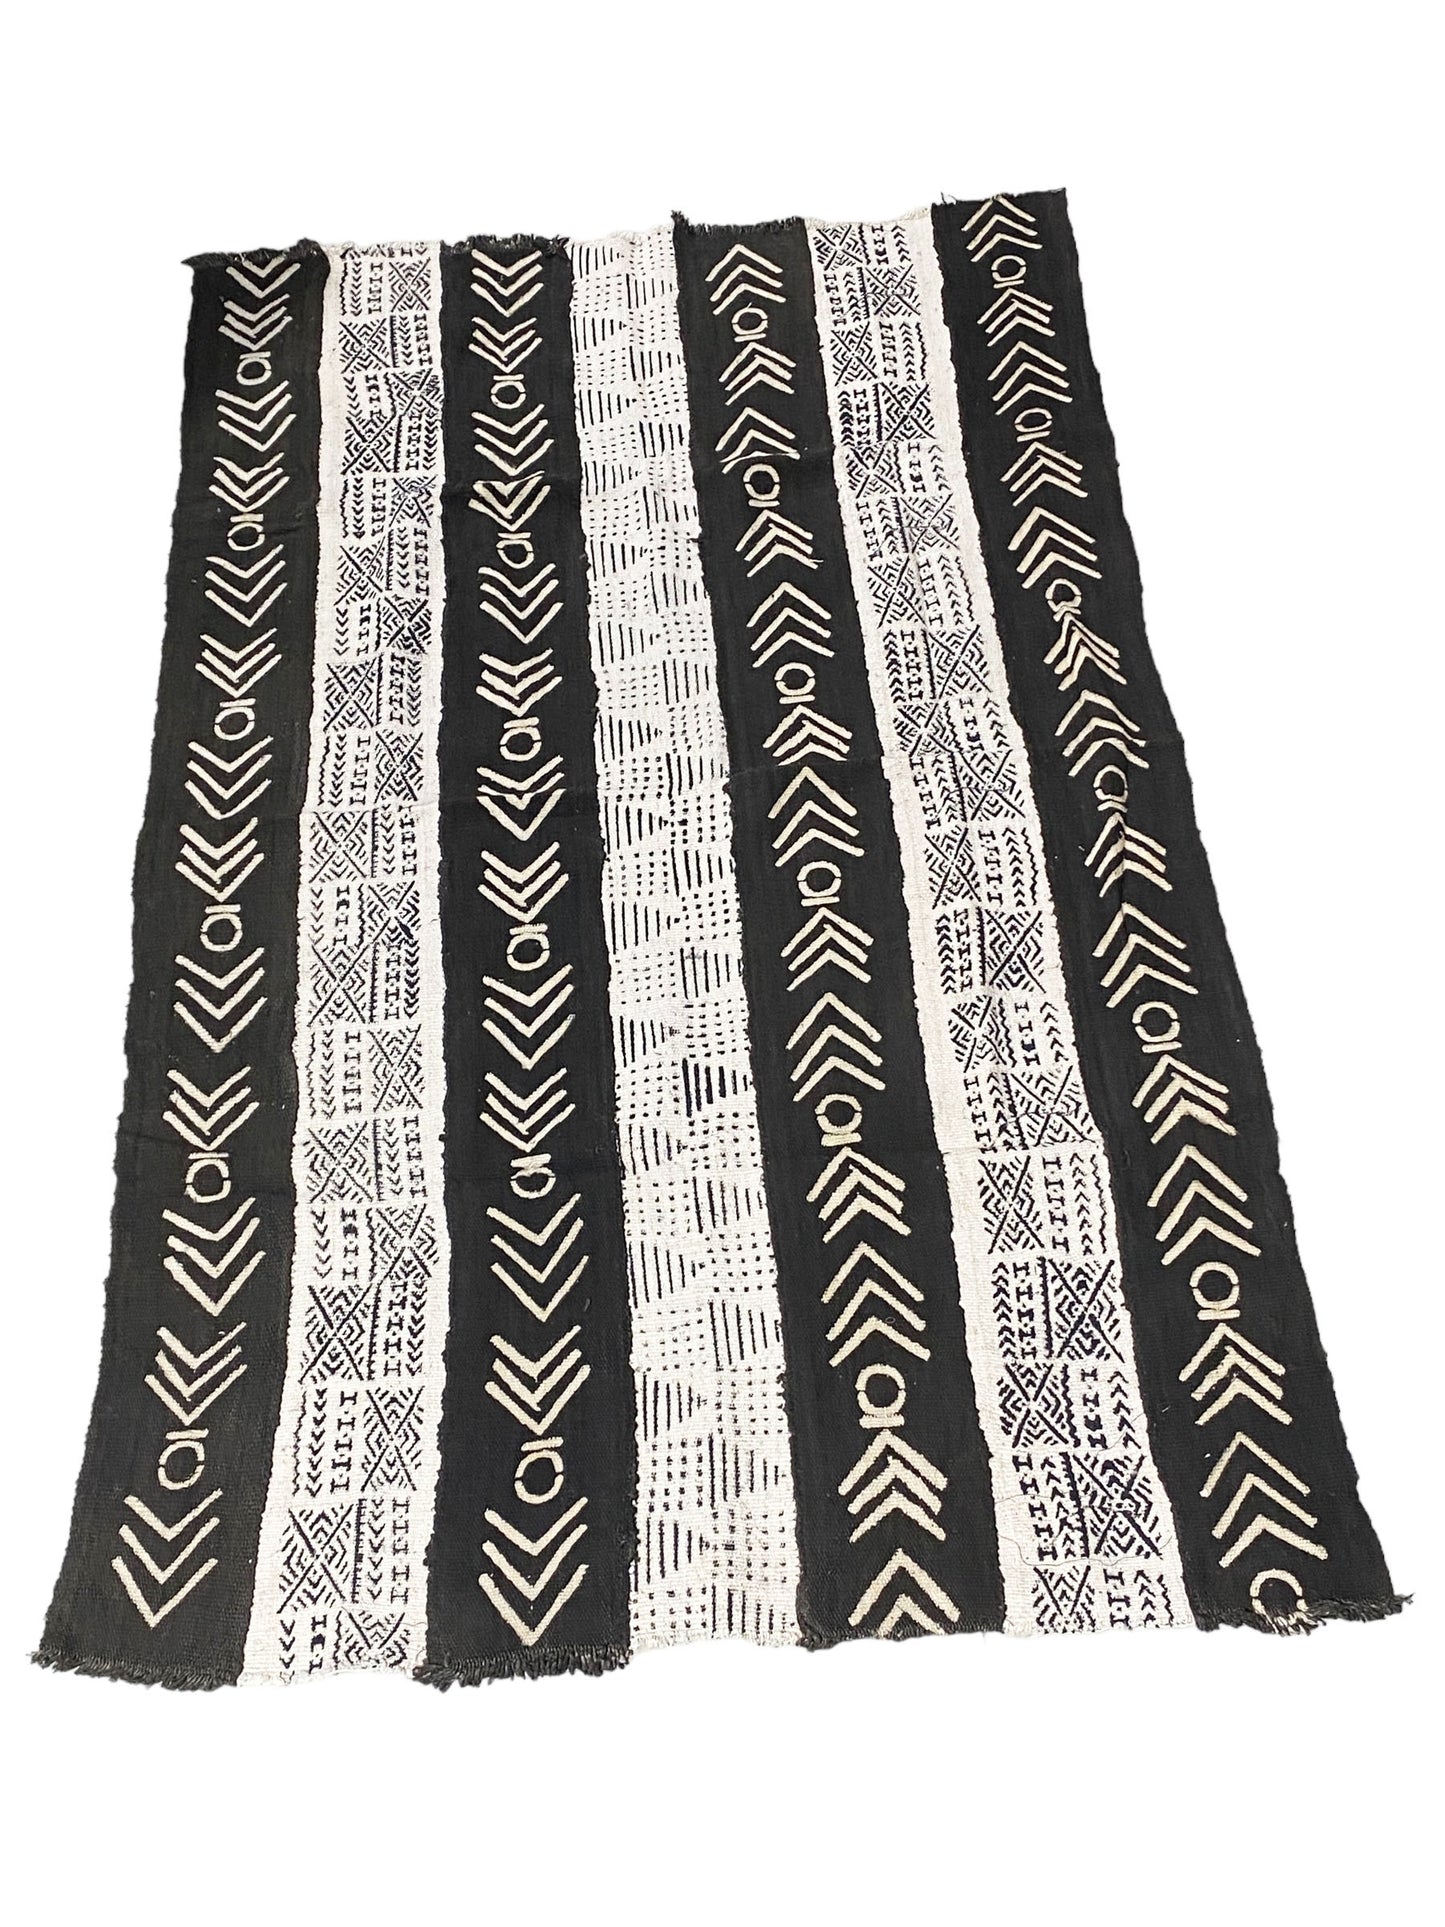 # 5731 African Black and White Mud Cloth Textile Mali 62" by 38"